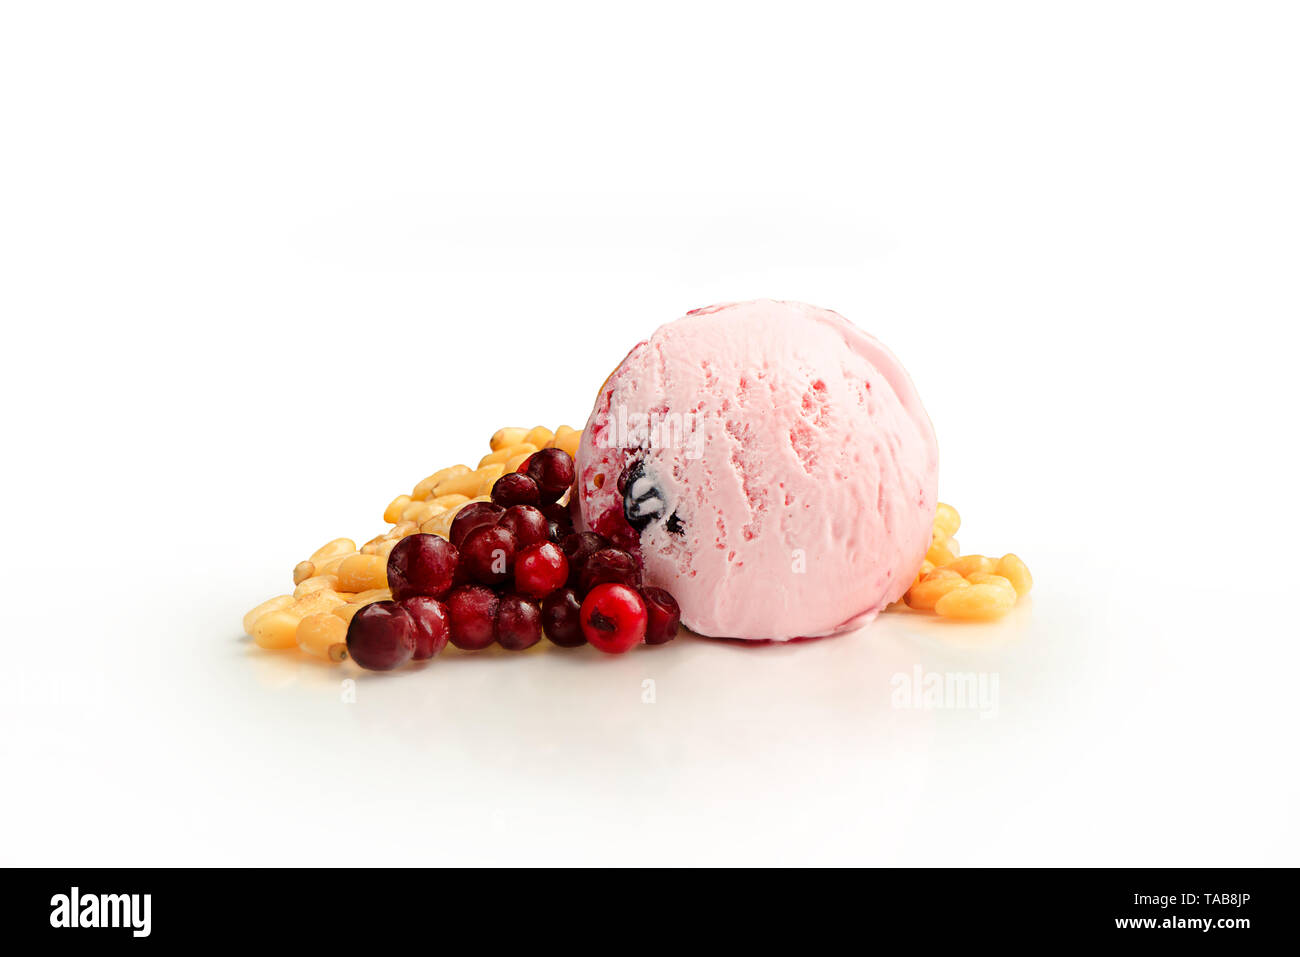 Ice cream ball, cranberries and pine nuts flavor with ingredients, isolated on a white background. Stock Photo